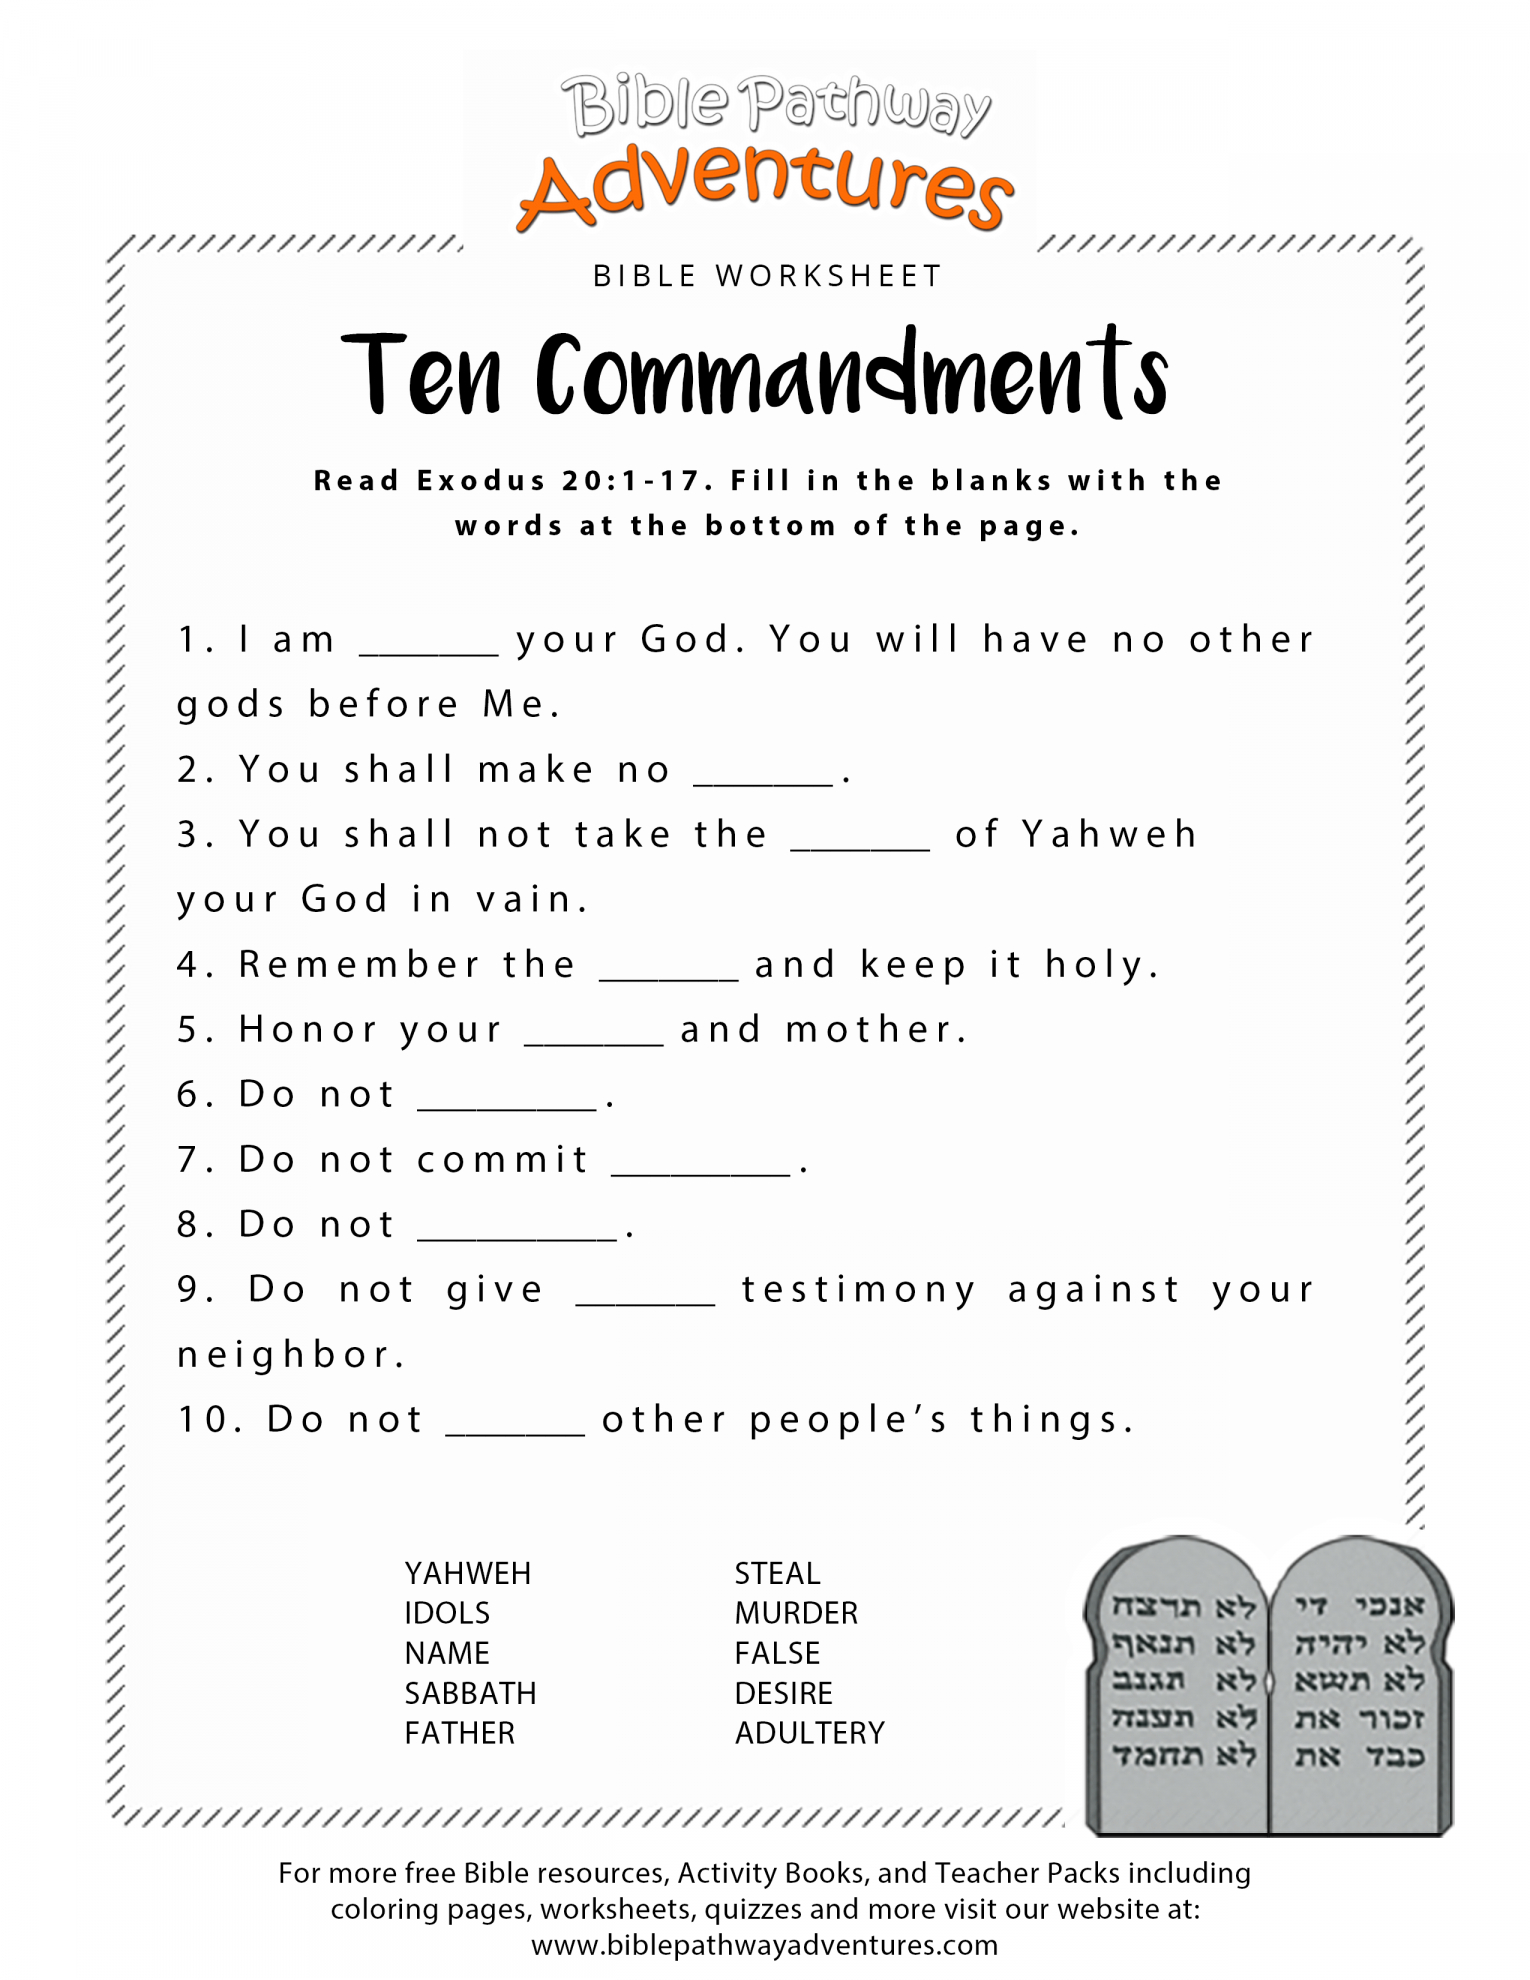 Youth Bible Study Worksheets Free Printable For Lessons Pdf - Free Printable Youth Bible Study Lessons